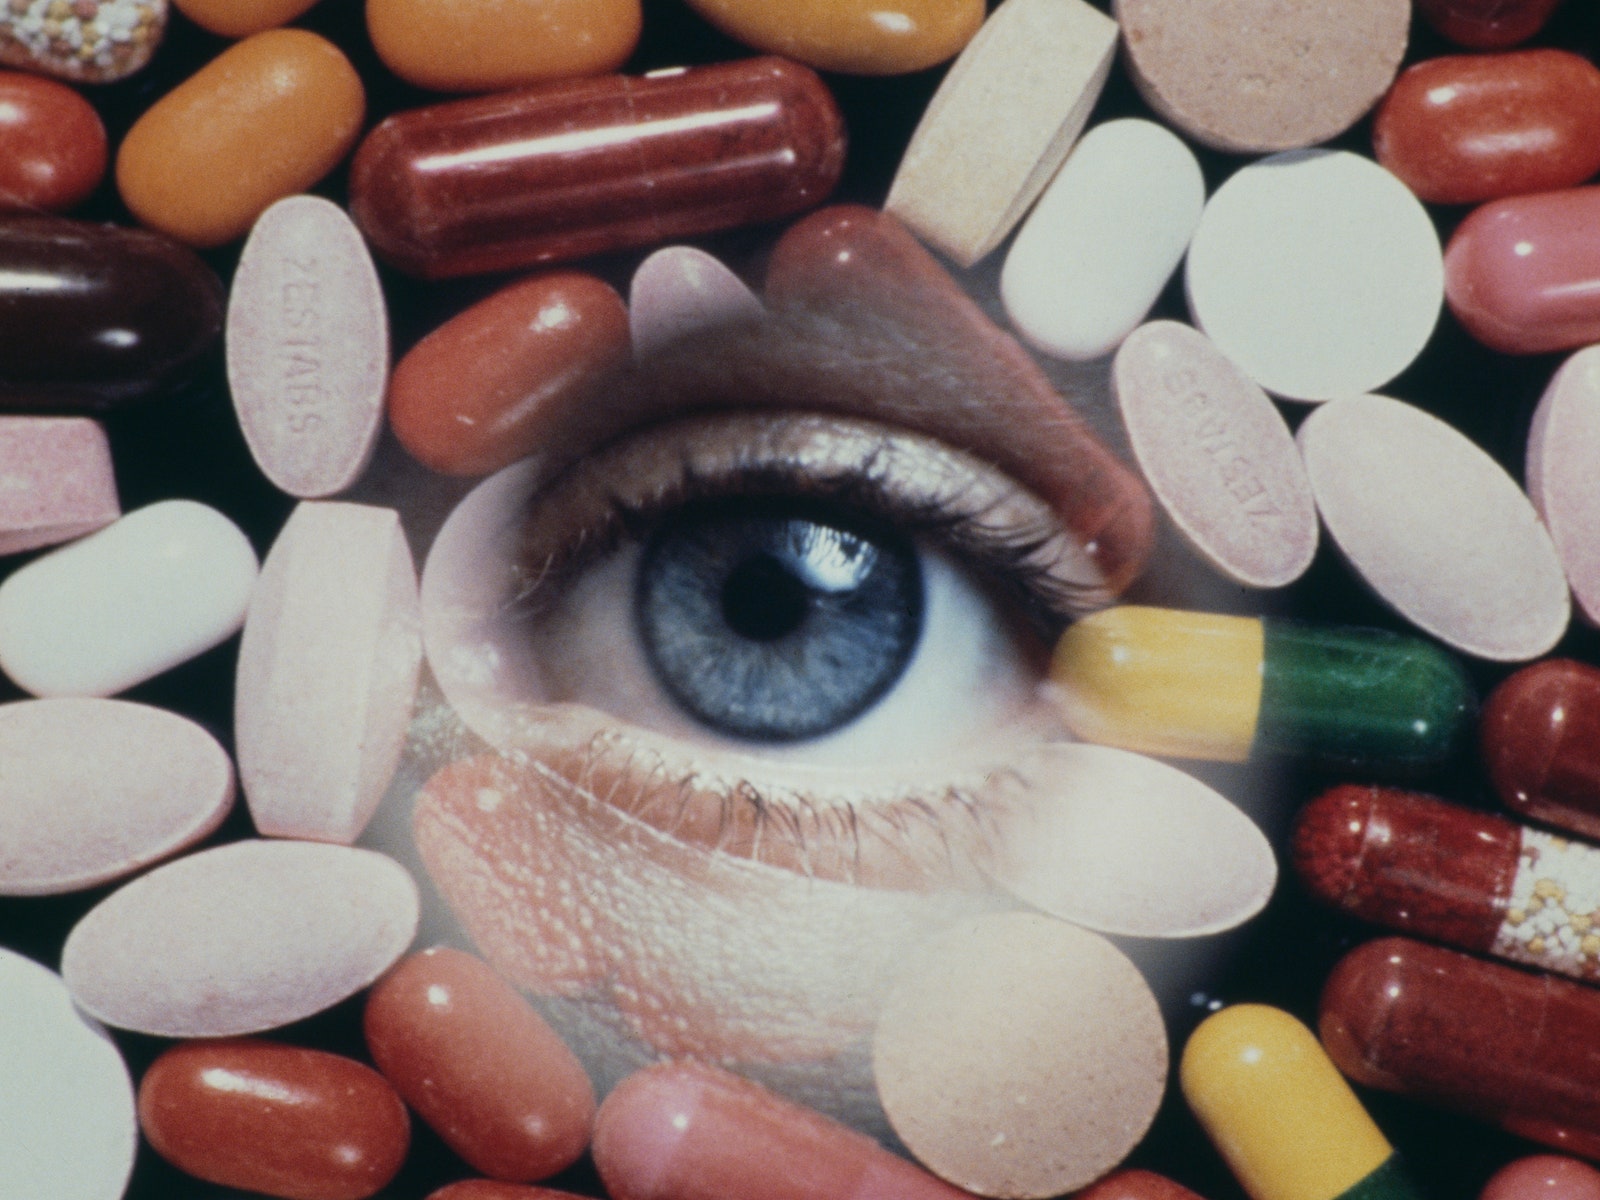 Pills and eye collage